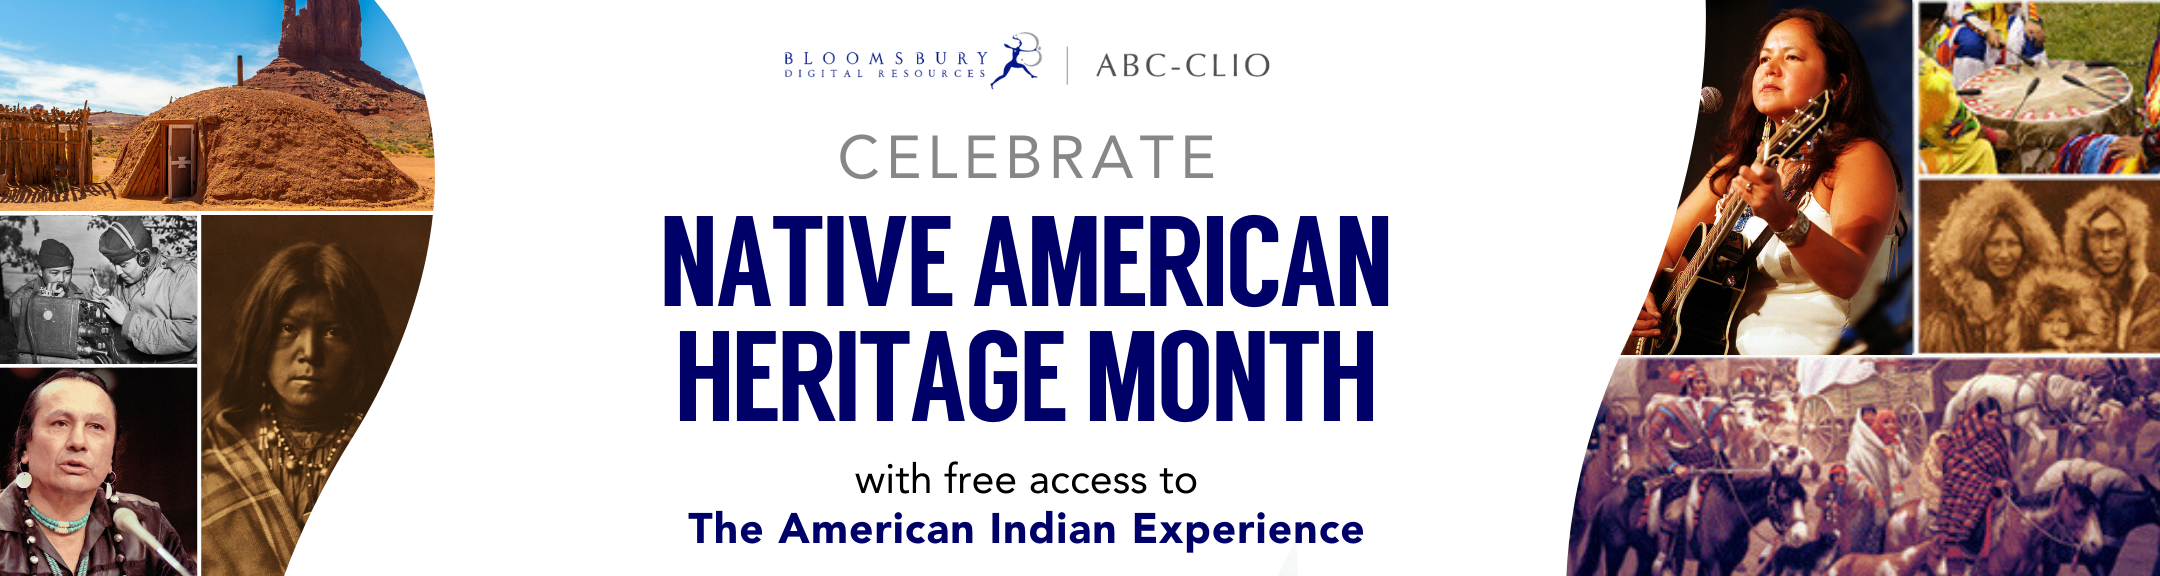 Celebrate Native American Heritage Month with free access to The American Indian Experience